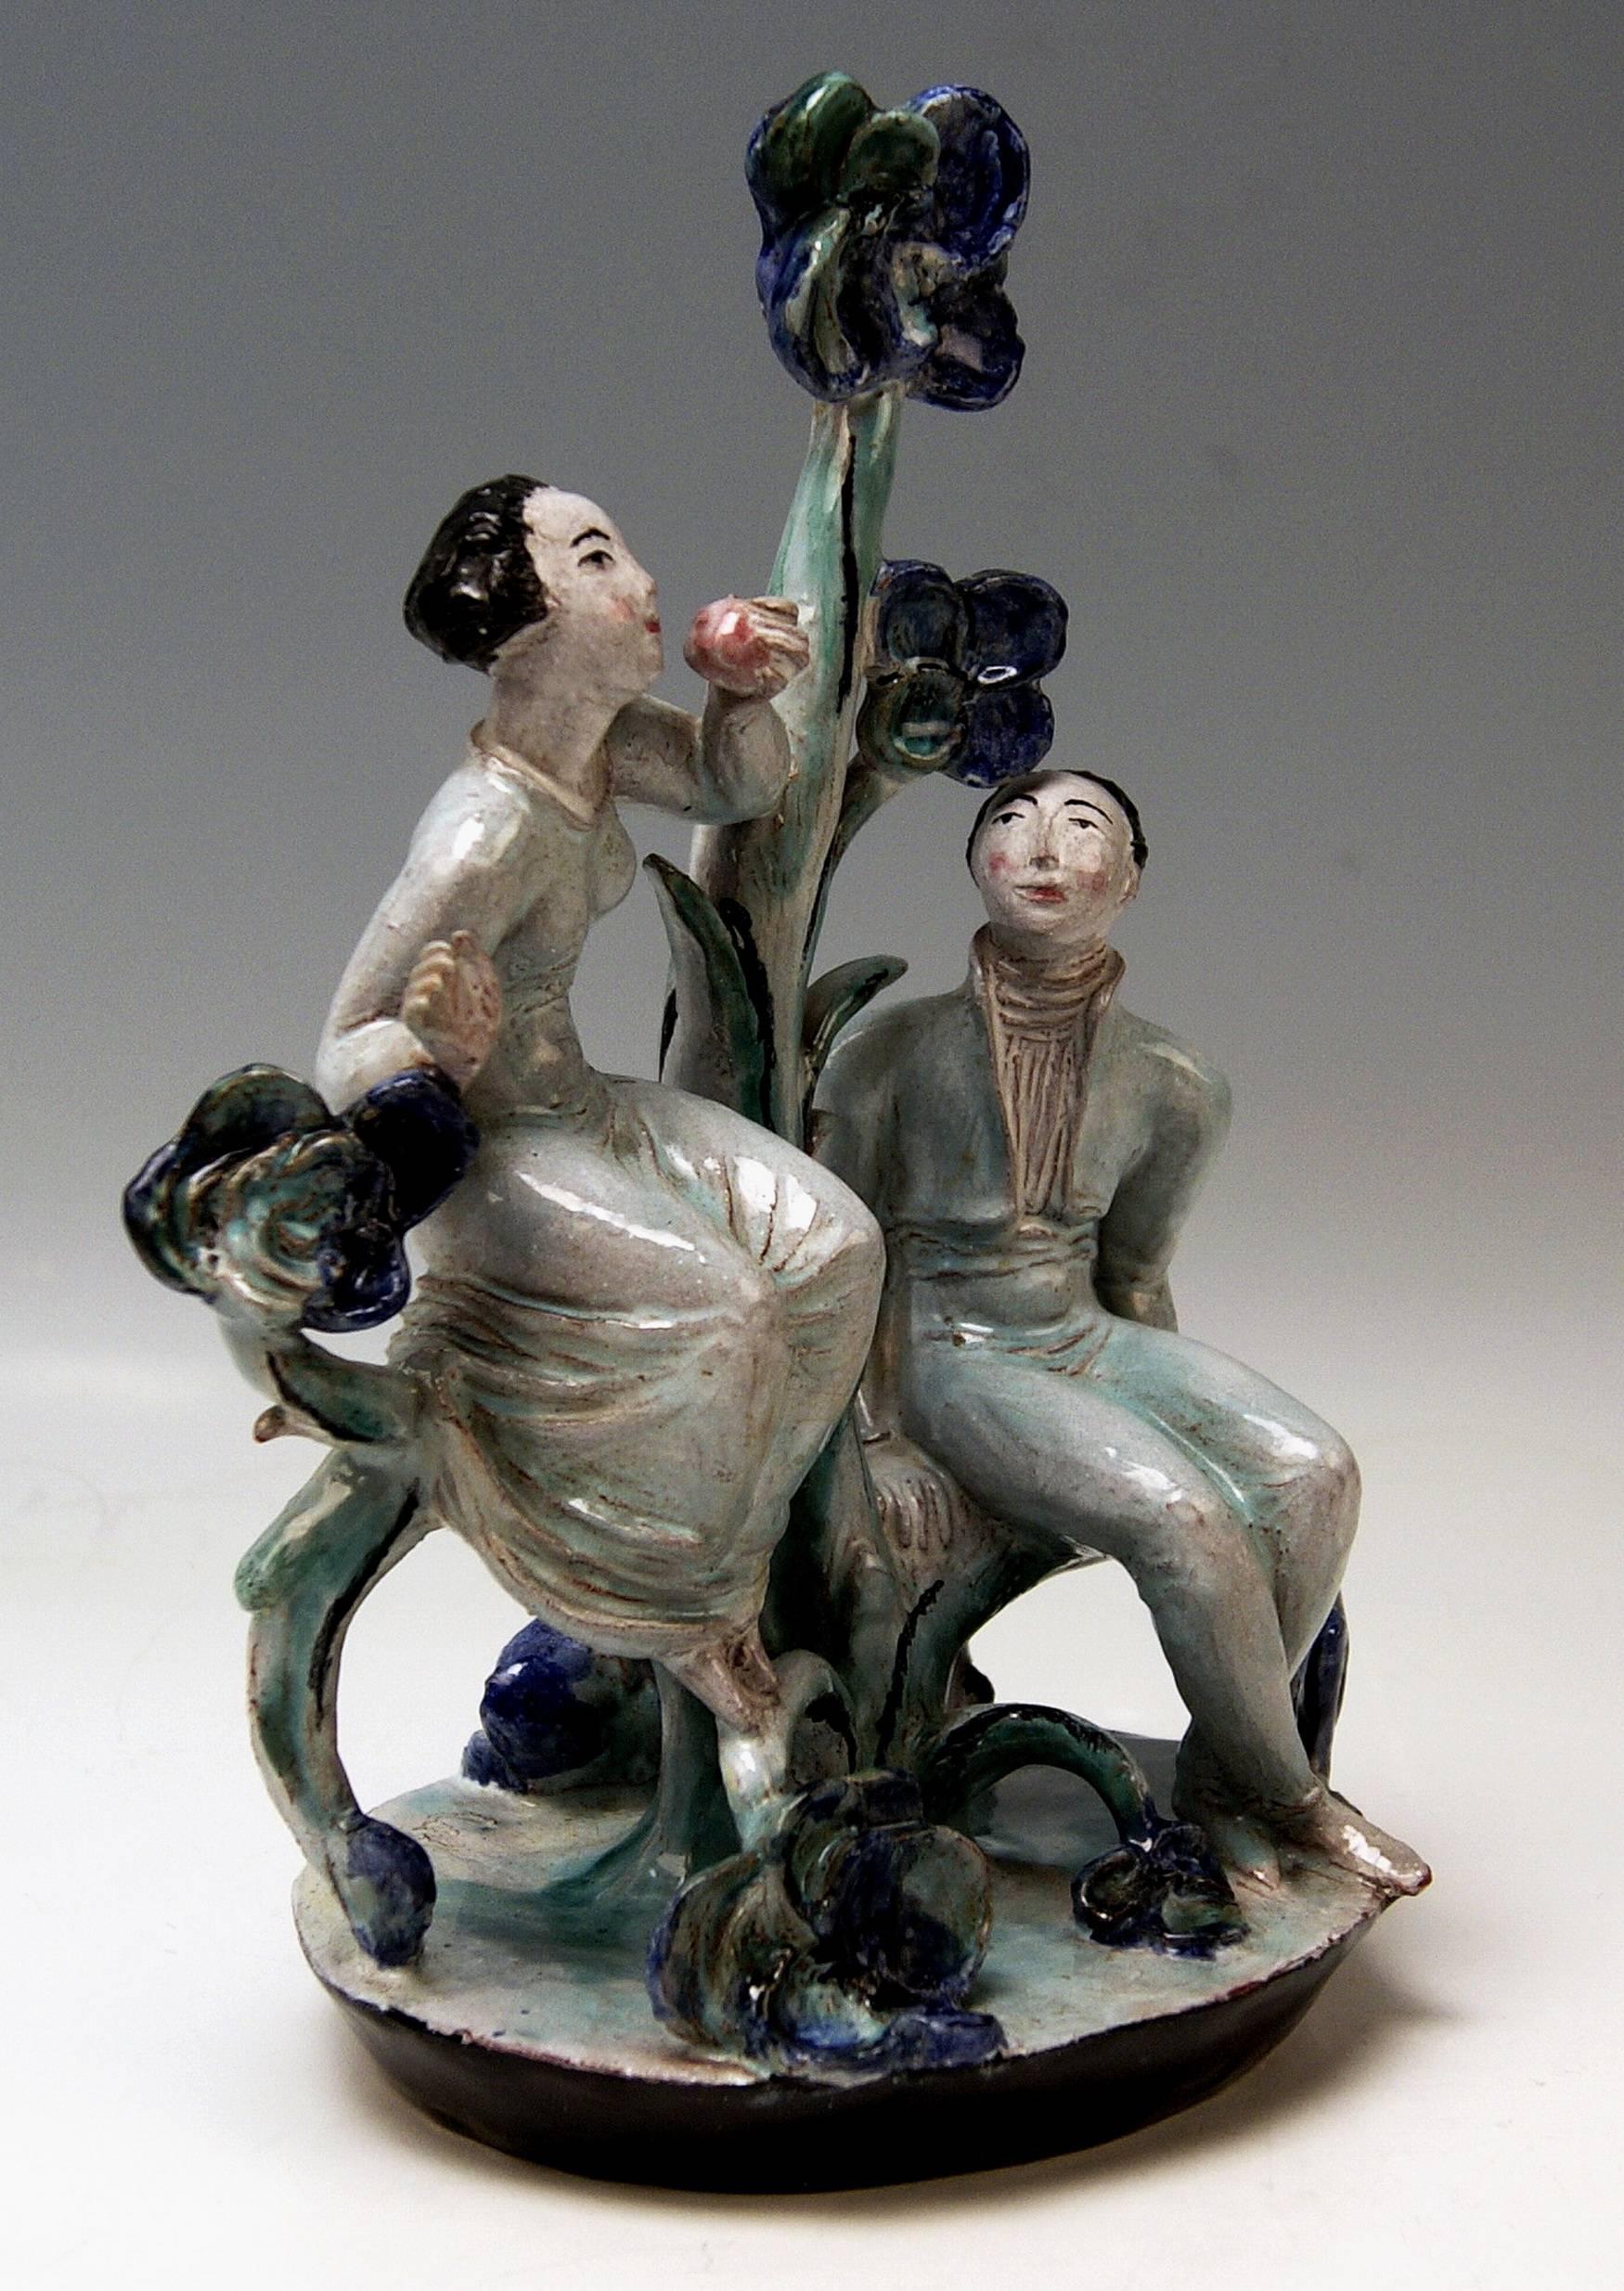 Superb ceramics figurine group depicting Adam and Eve.

Designed by Lotte Calm-Wierink (1897 - died after ther year 1953): One of the most interesting female expressive ceramics designers/modellers having been active on behalf of WIENER